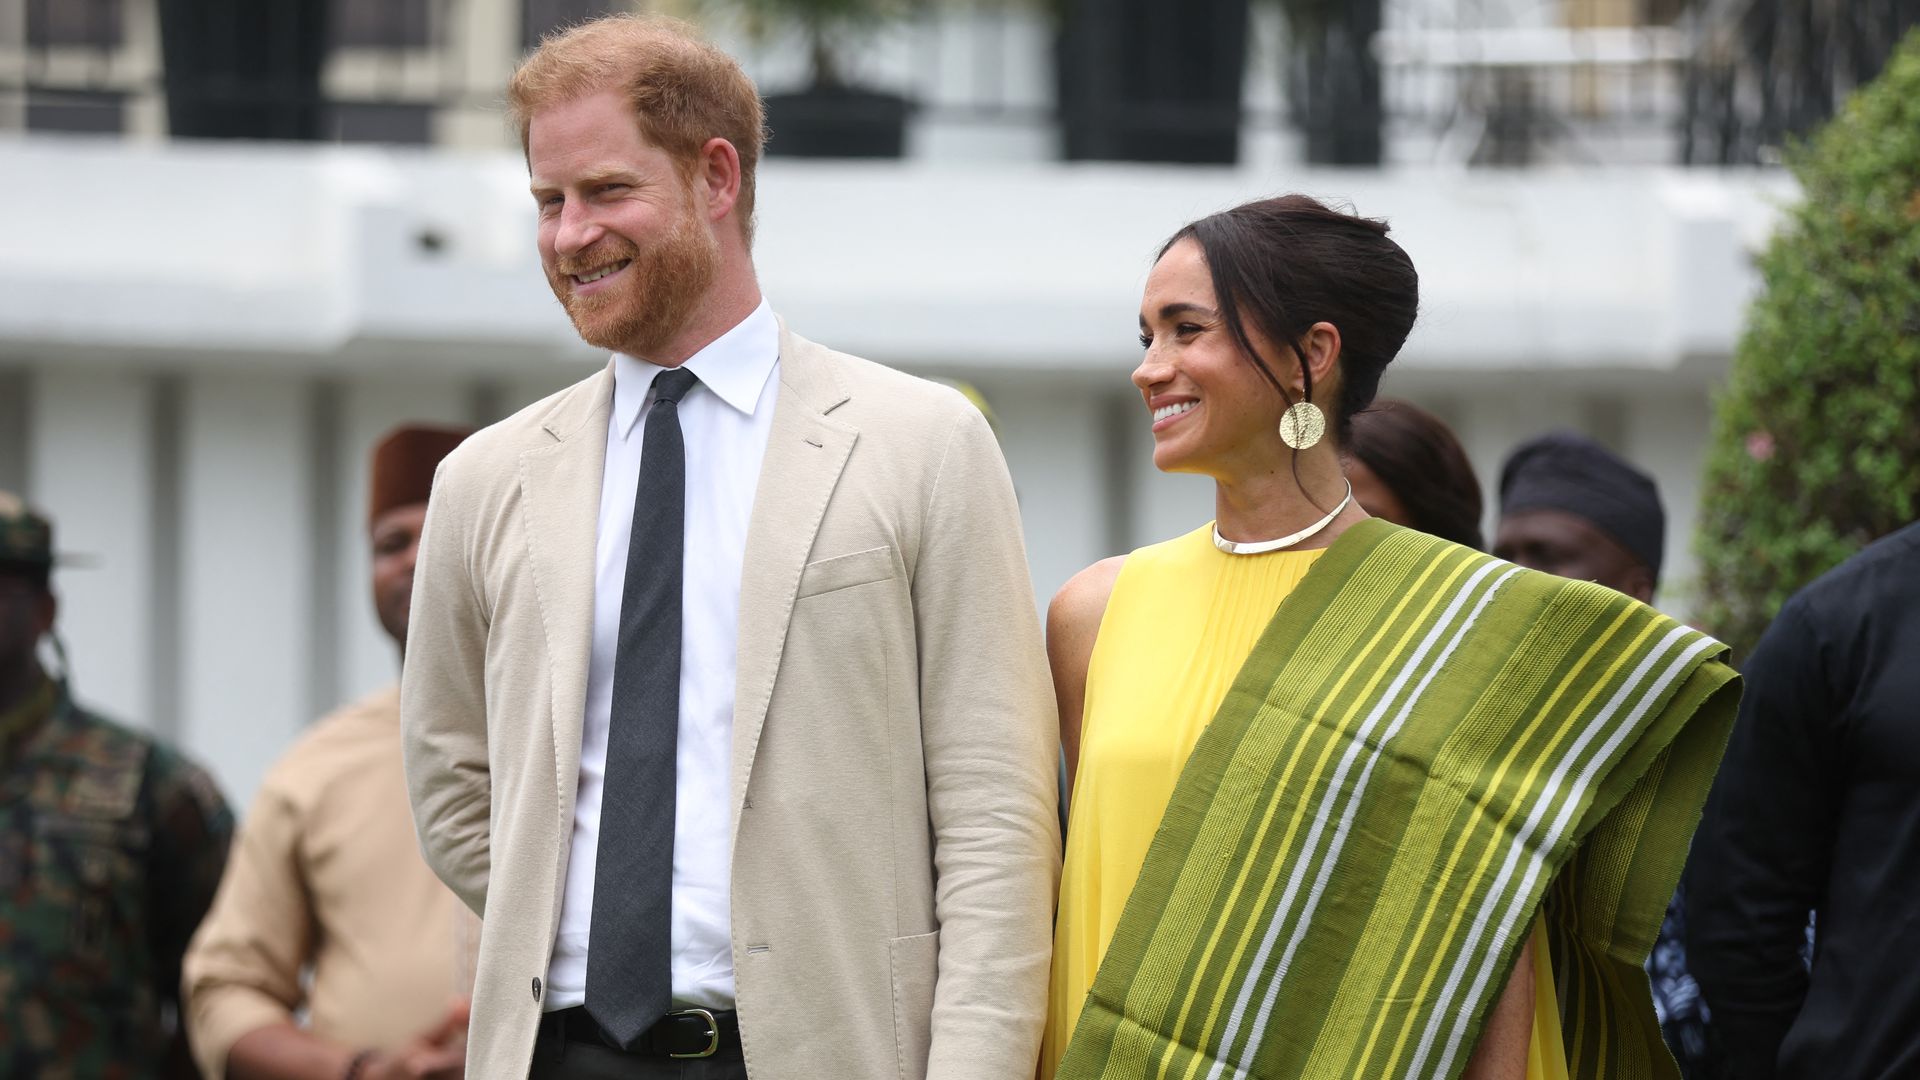 Supportive Meghan Markle looks on at husband Prince Harry in beautiful unseen photo from Nigeria trip